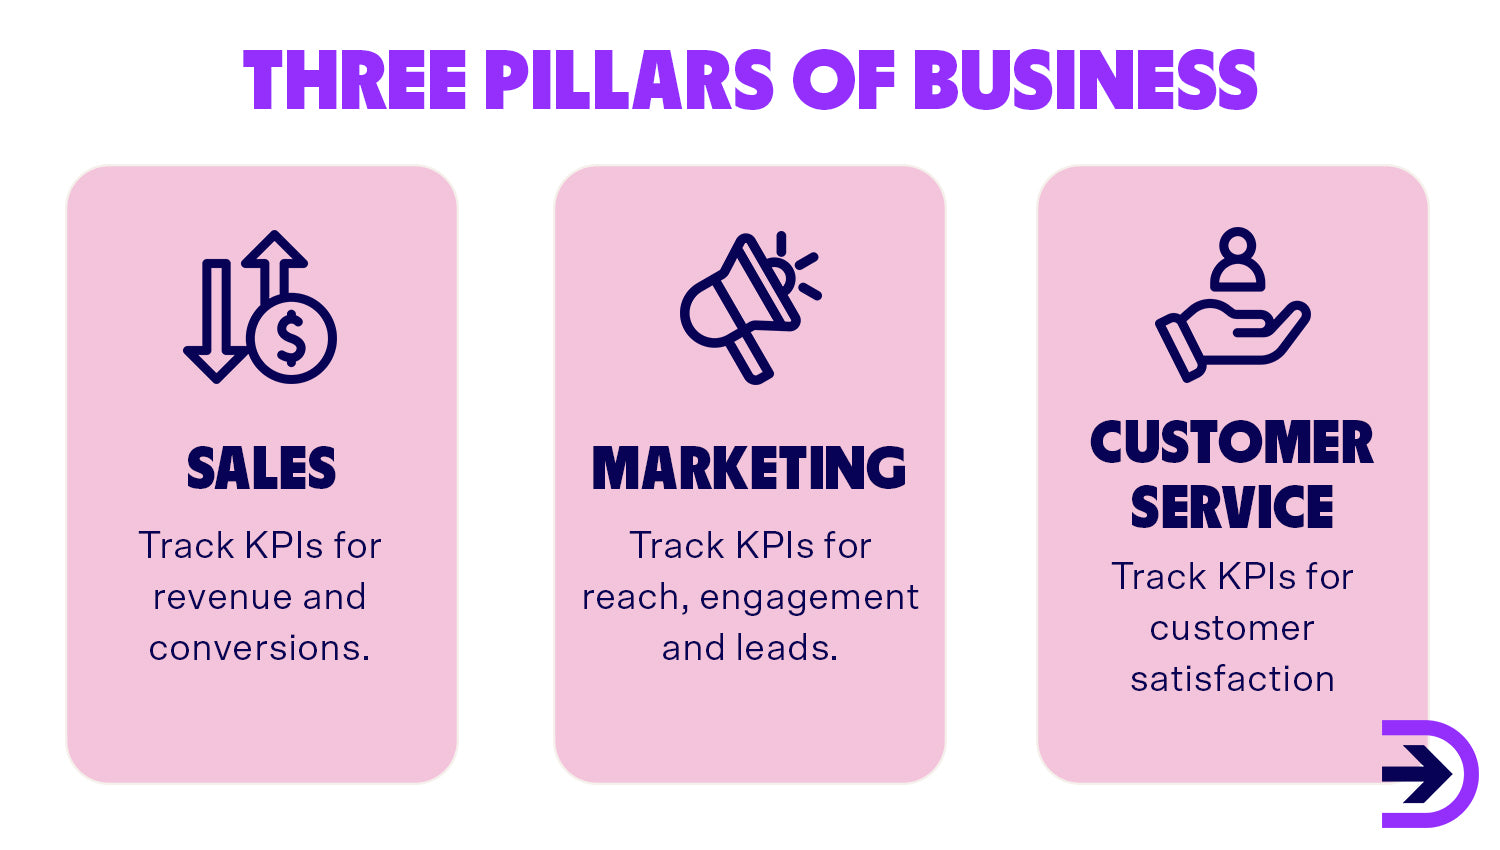 The three pillars of business are sales, marketing and customer service.